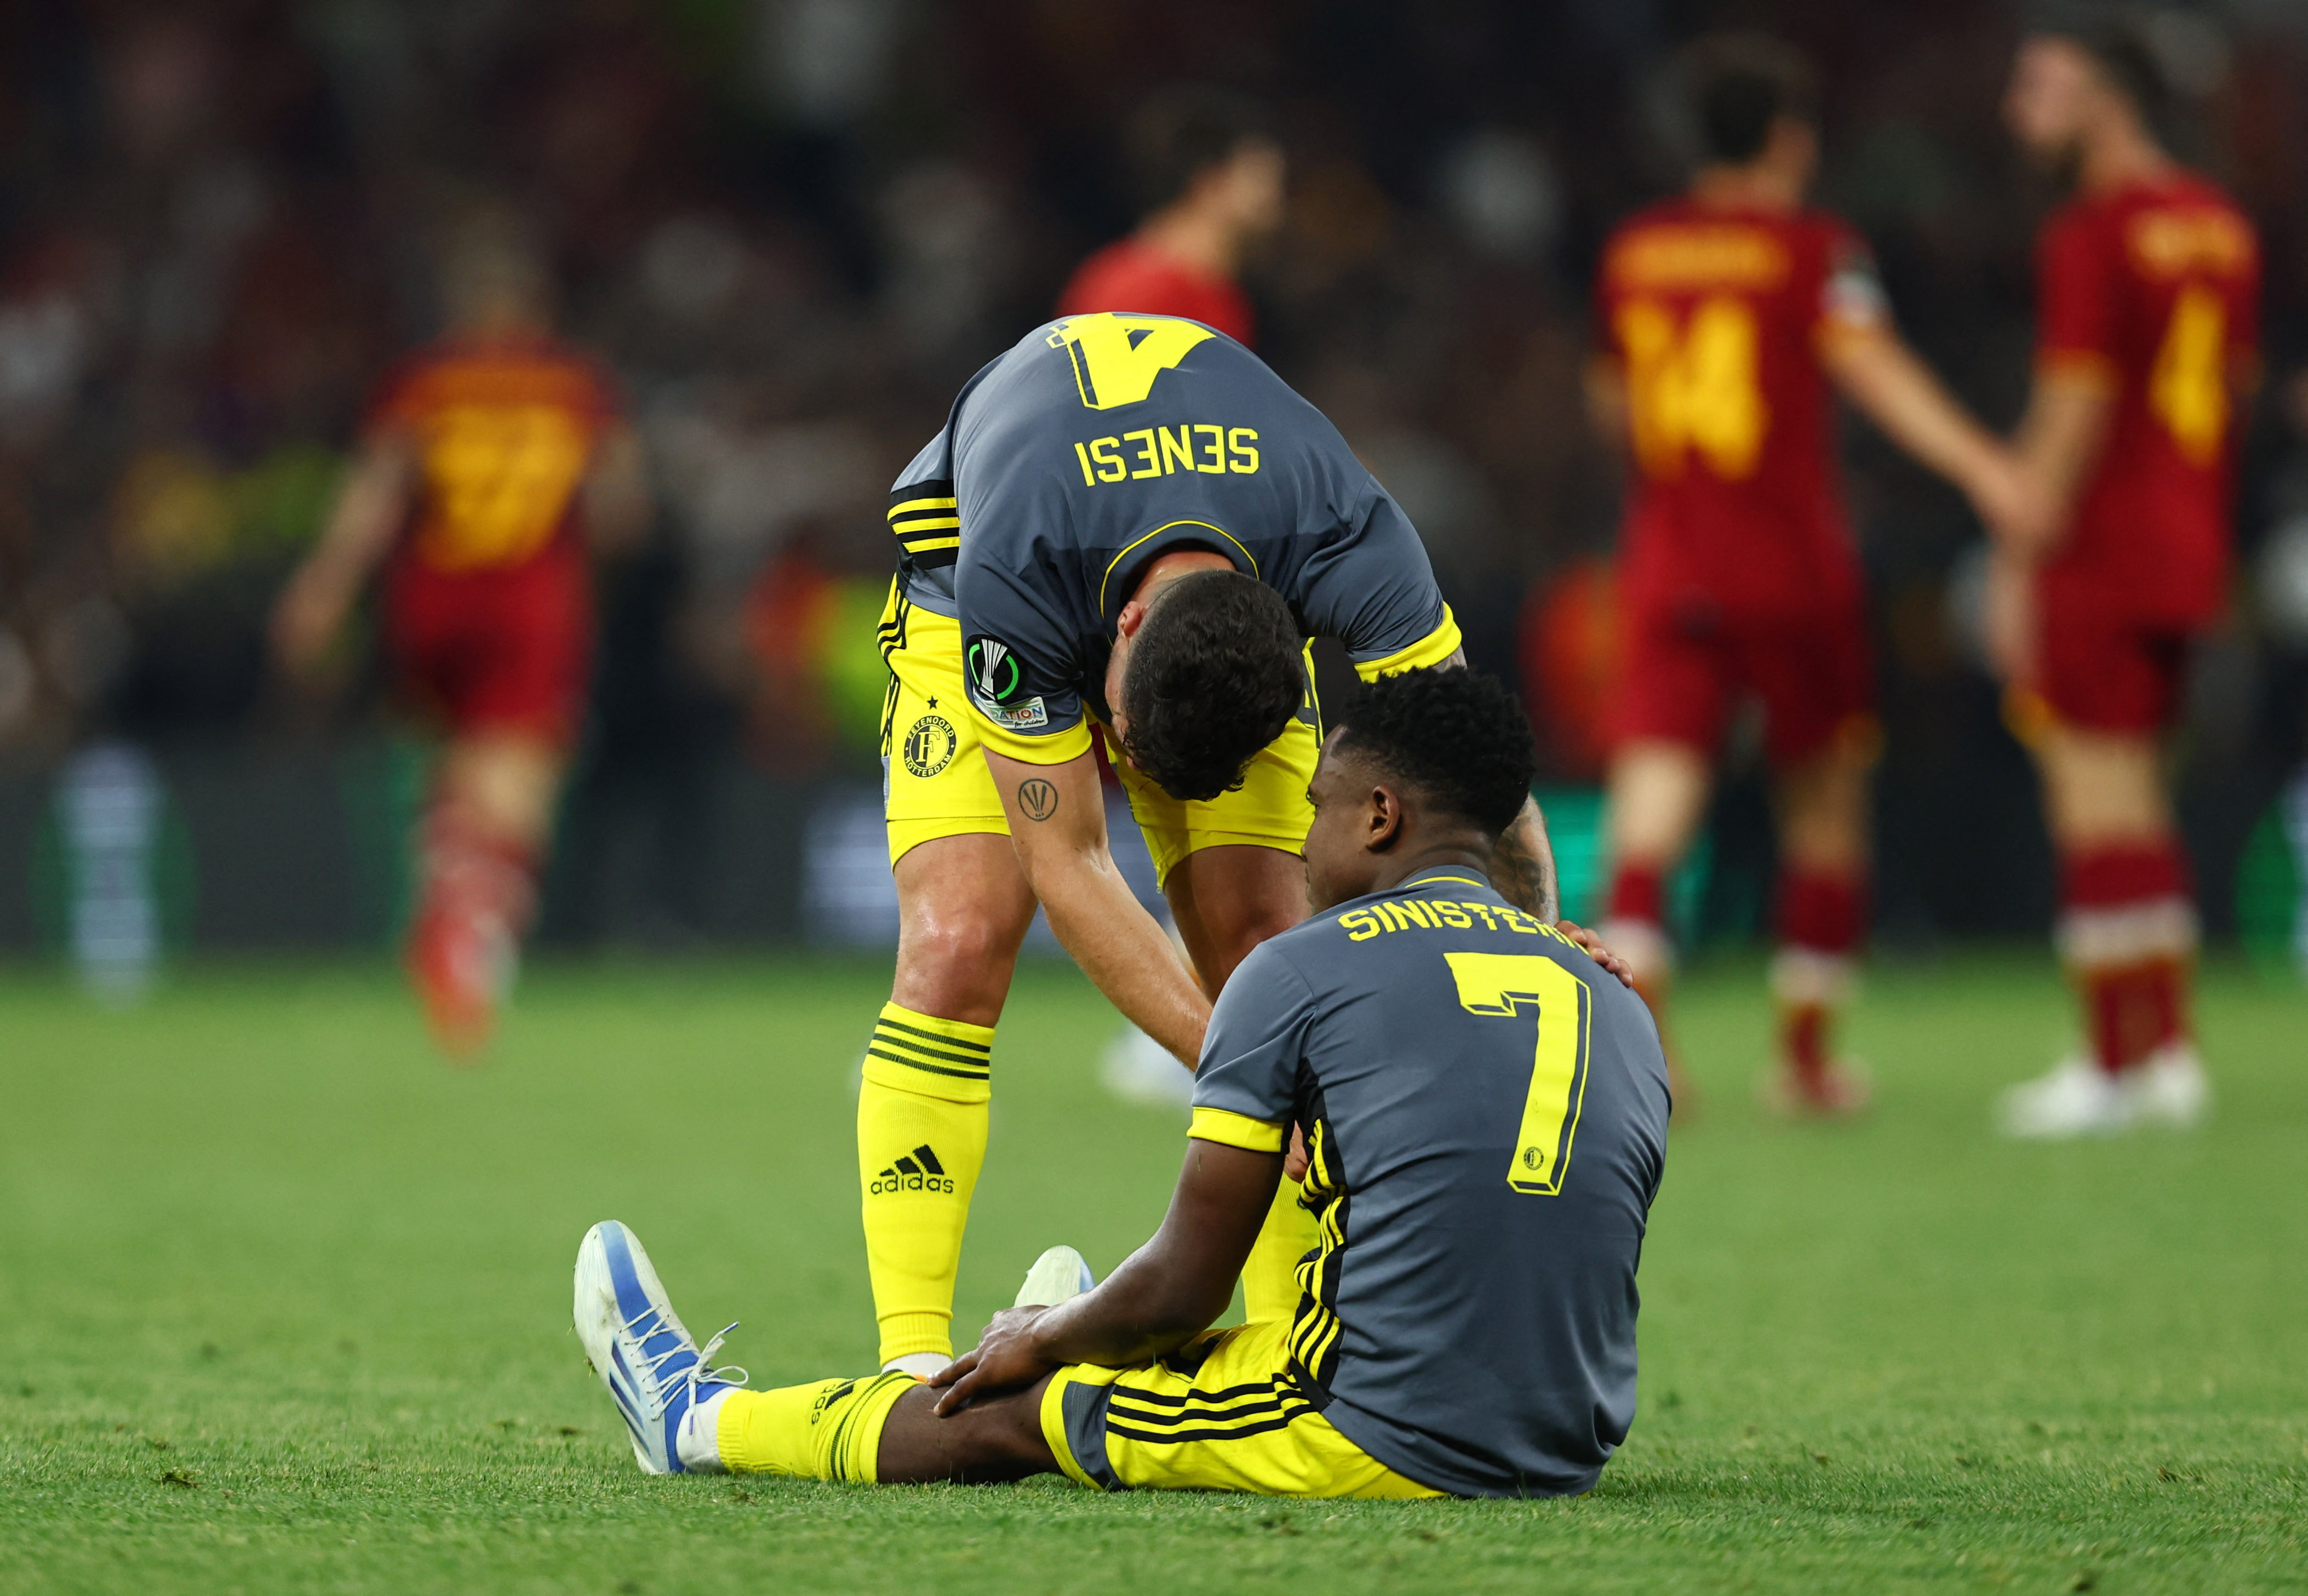 Soccer Football - Europa Conference League - Final - AS Roma v Feyenoord - Arena Kombetare, Tirana, Albania - May 25, 2022  Feyenoord's Marcos Senesi and Luis Sinisterra look dejected after the match REUTERS/Marko Djurica